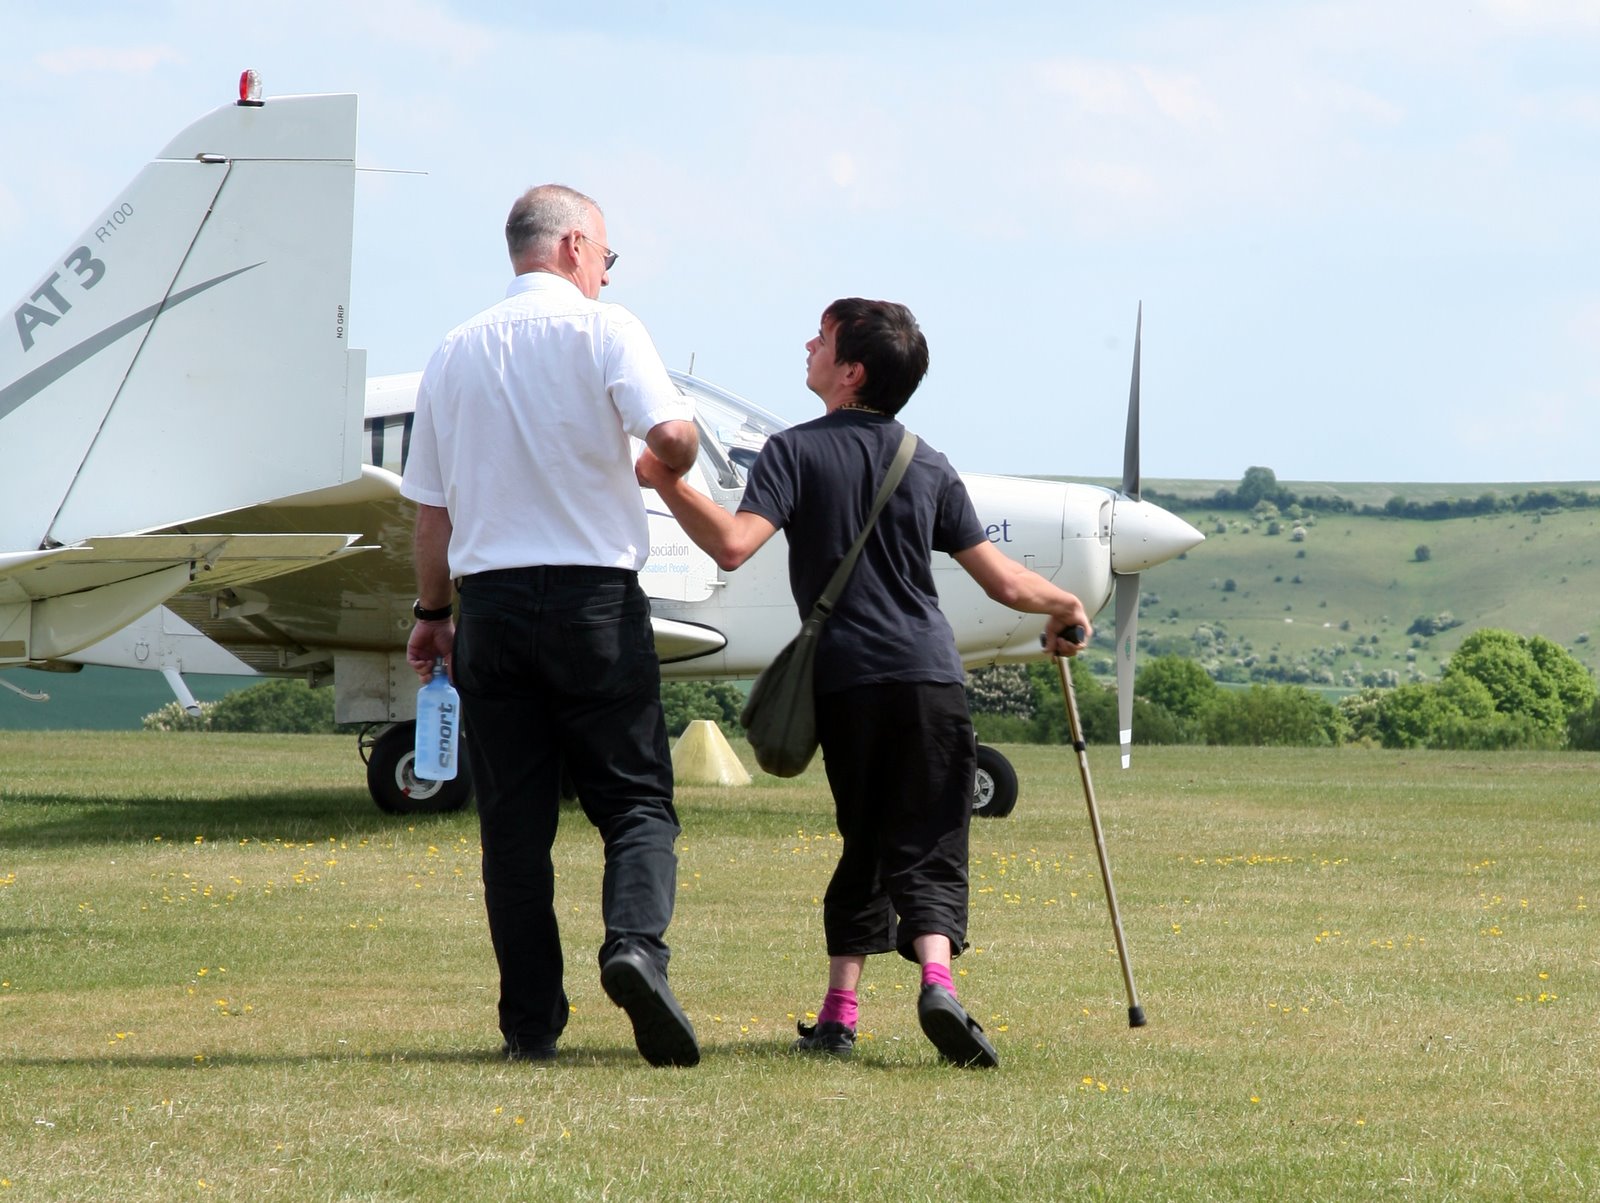 Aerobility, Flynqy and Cornwall Airport provide flights for the disabled